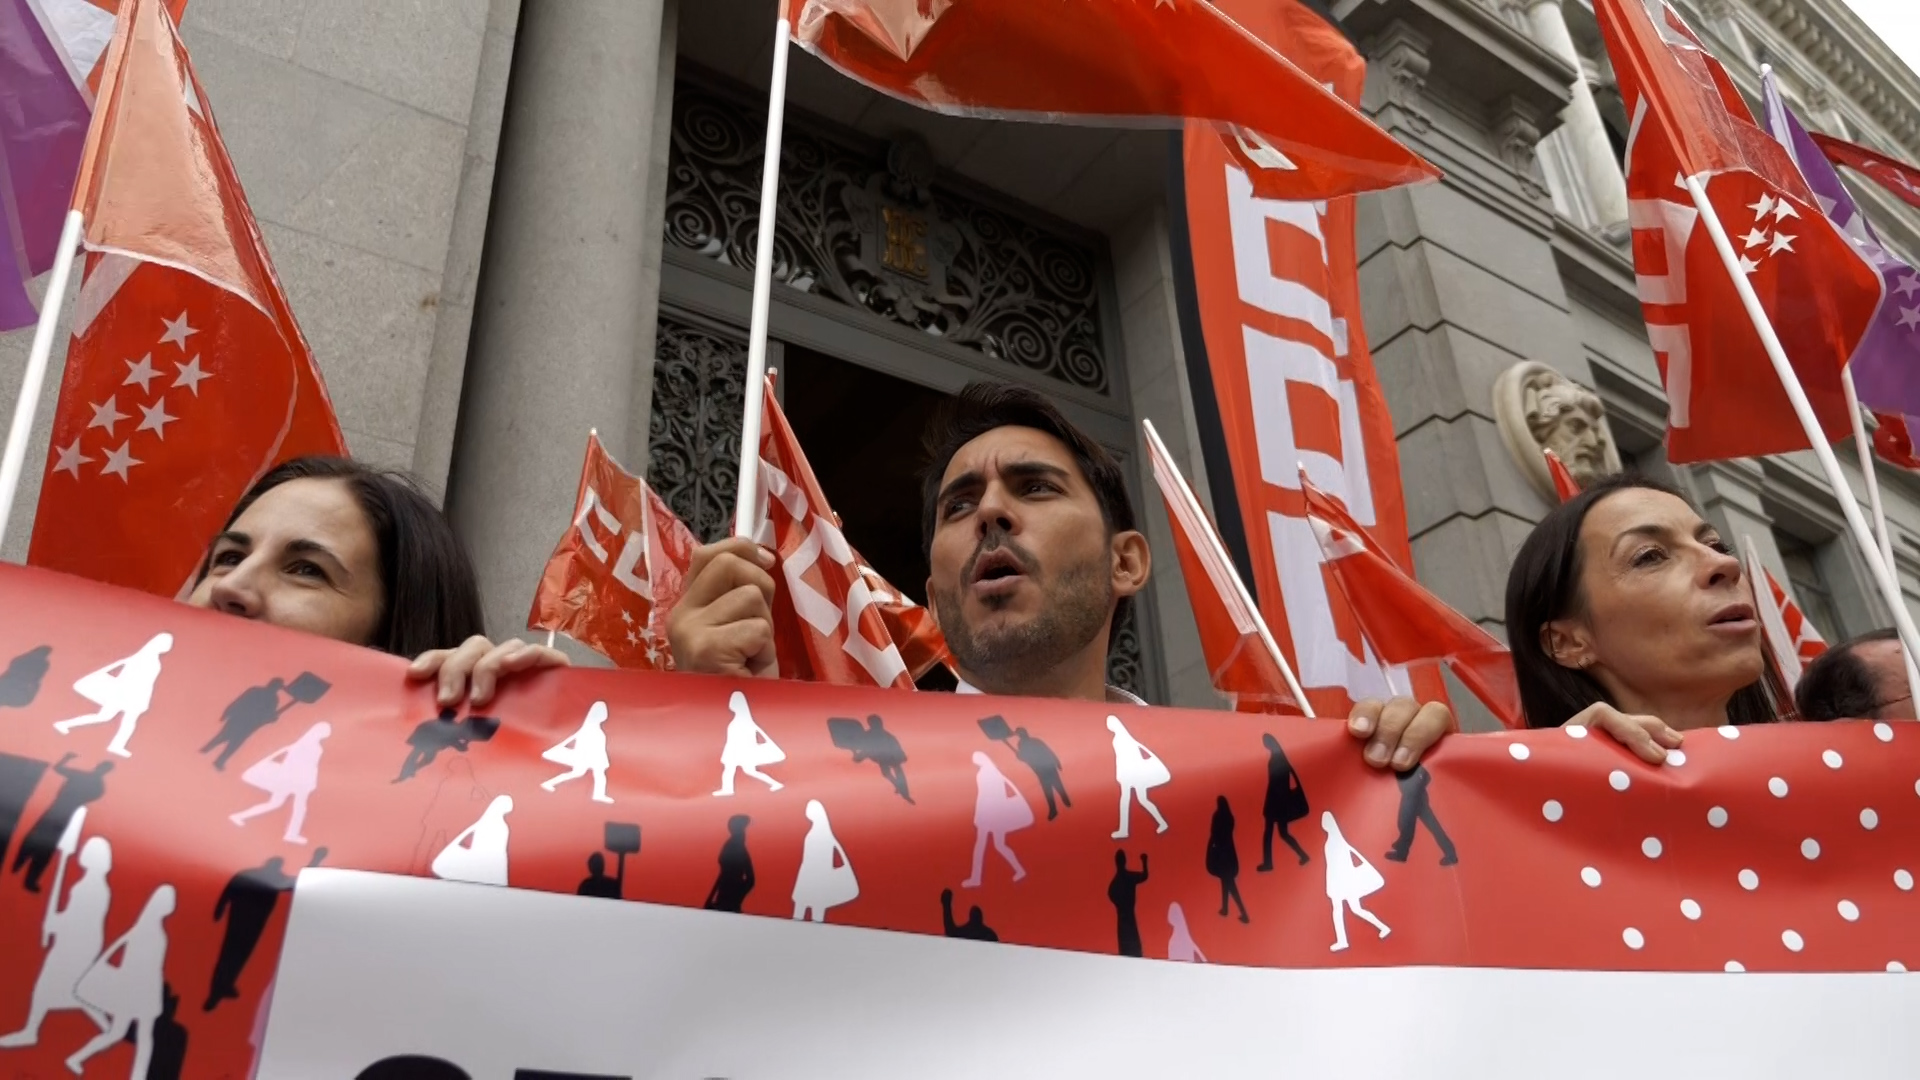 Banking labor unions in Spain are calling for better conditions for their members. /Rahul Pathak/CGTN Europe